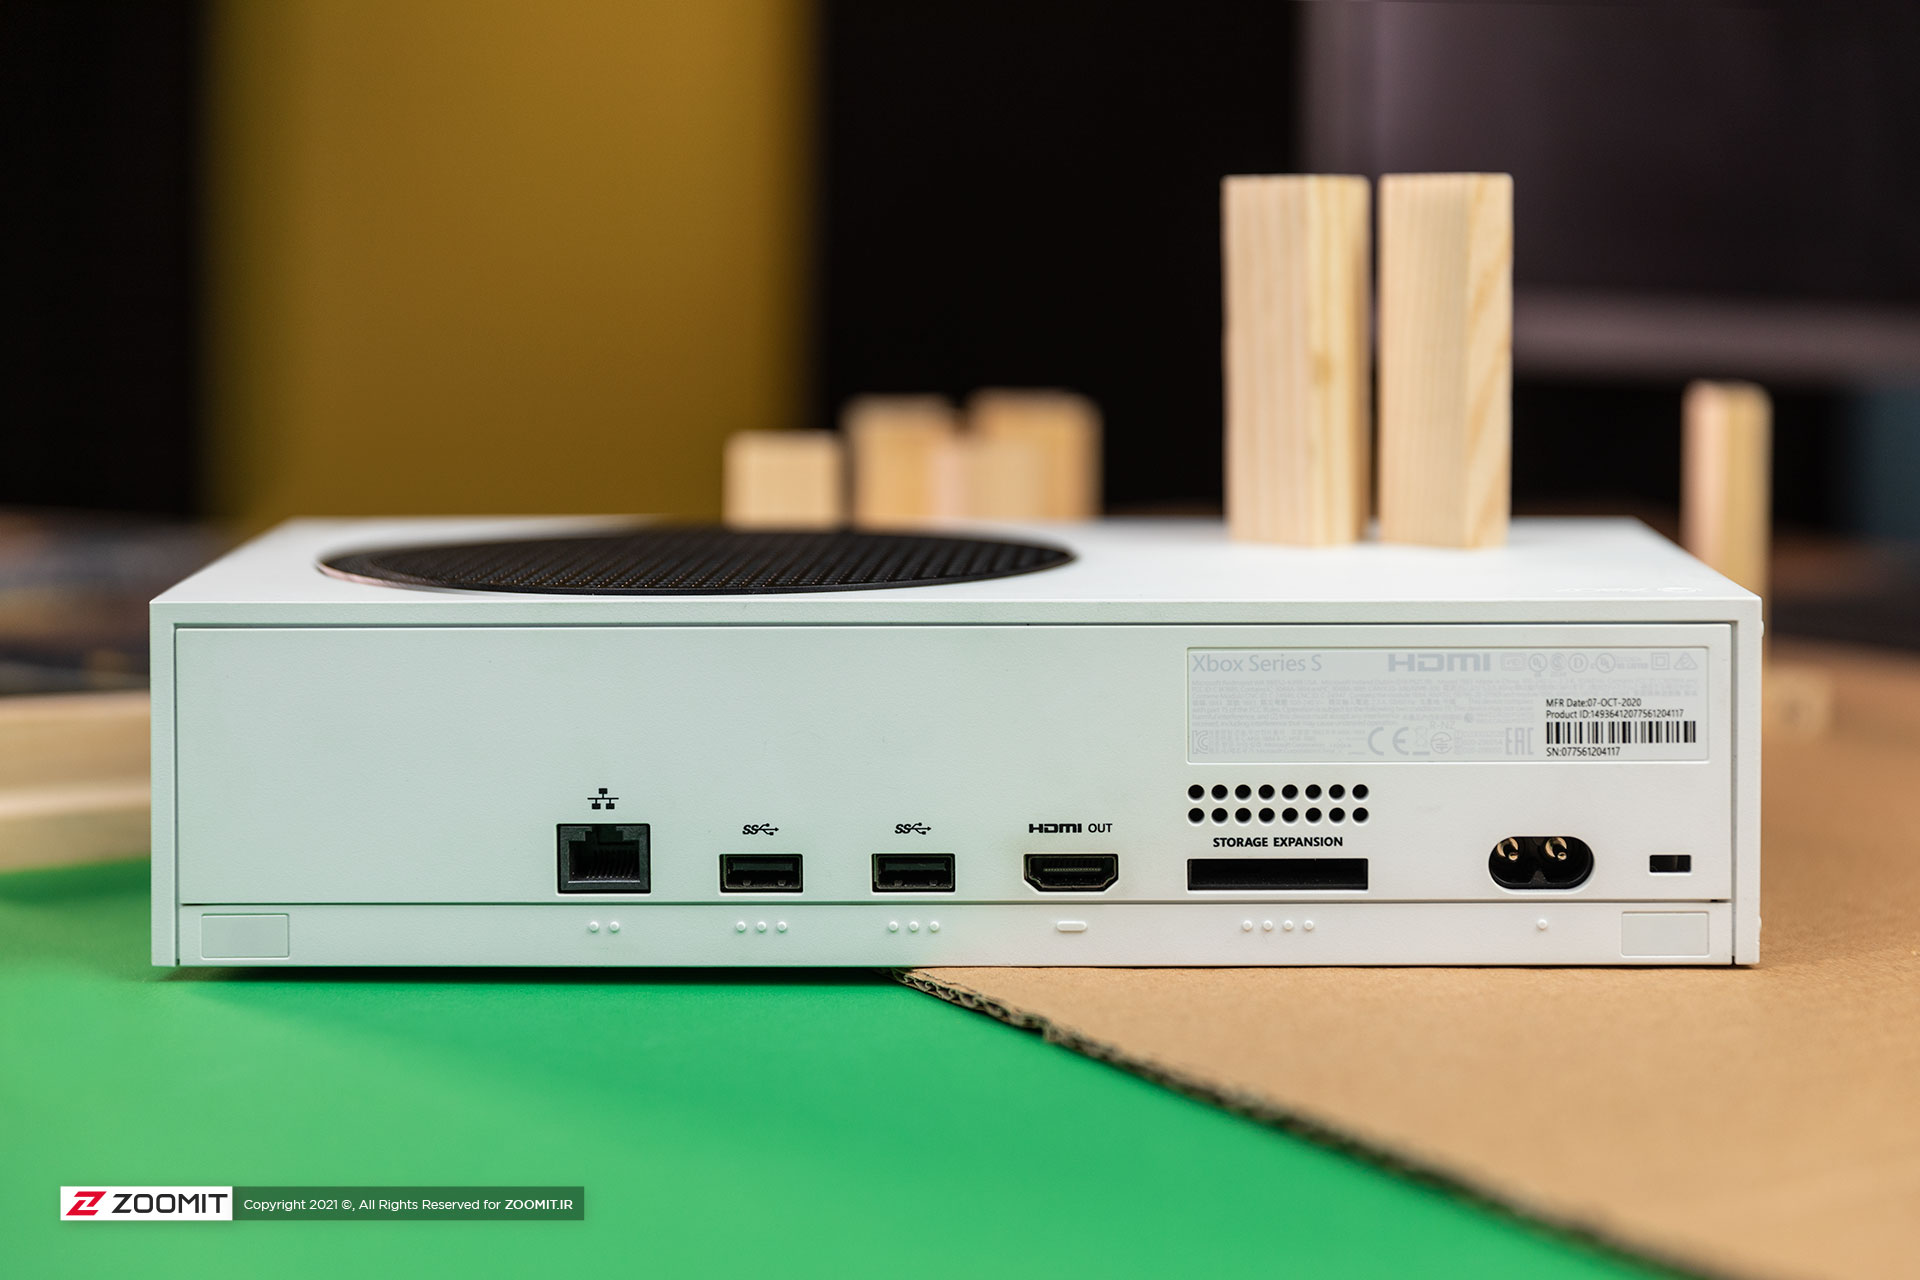 Ports on the back of the Xbox S Series console